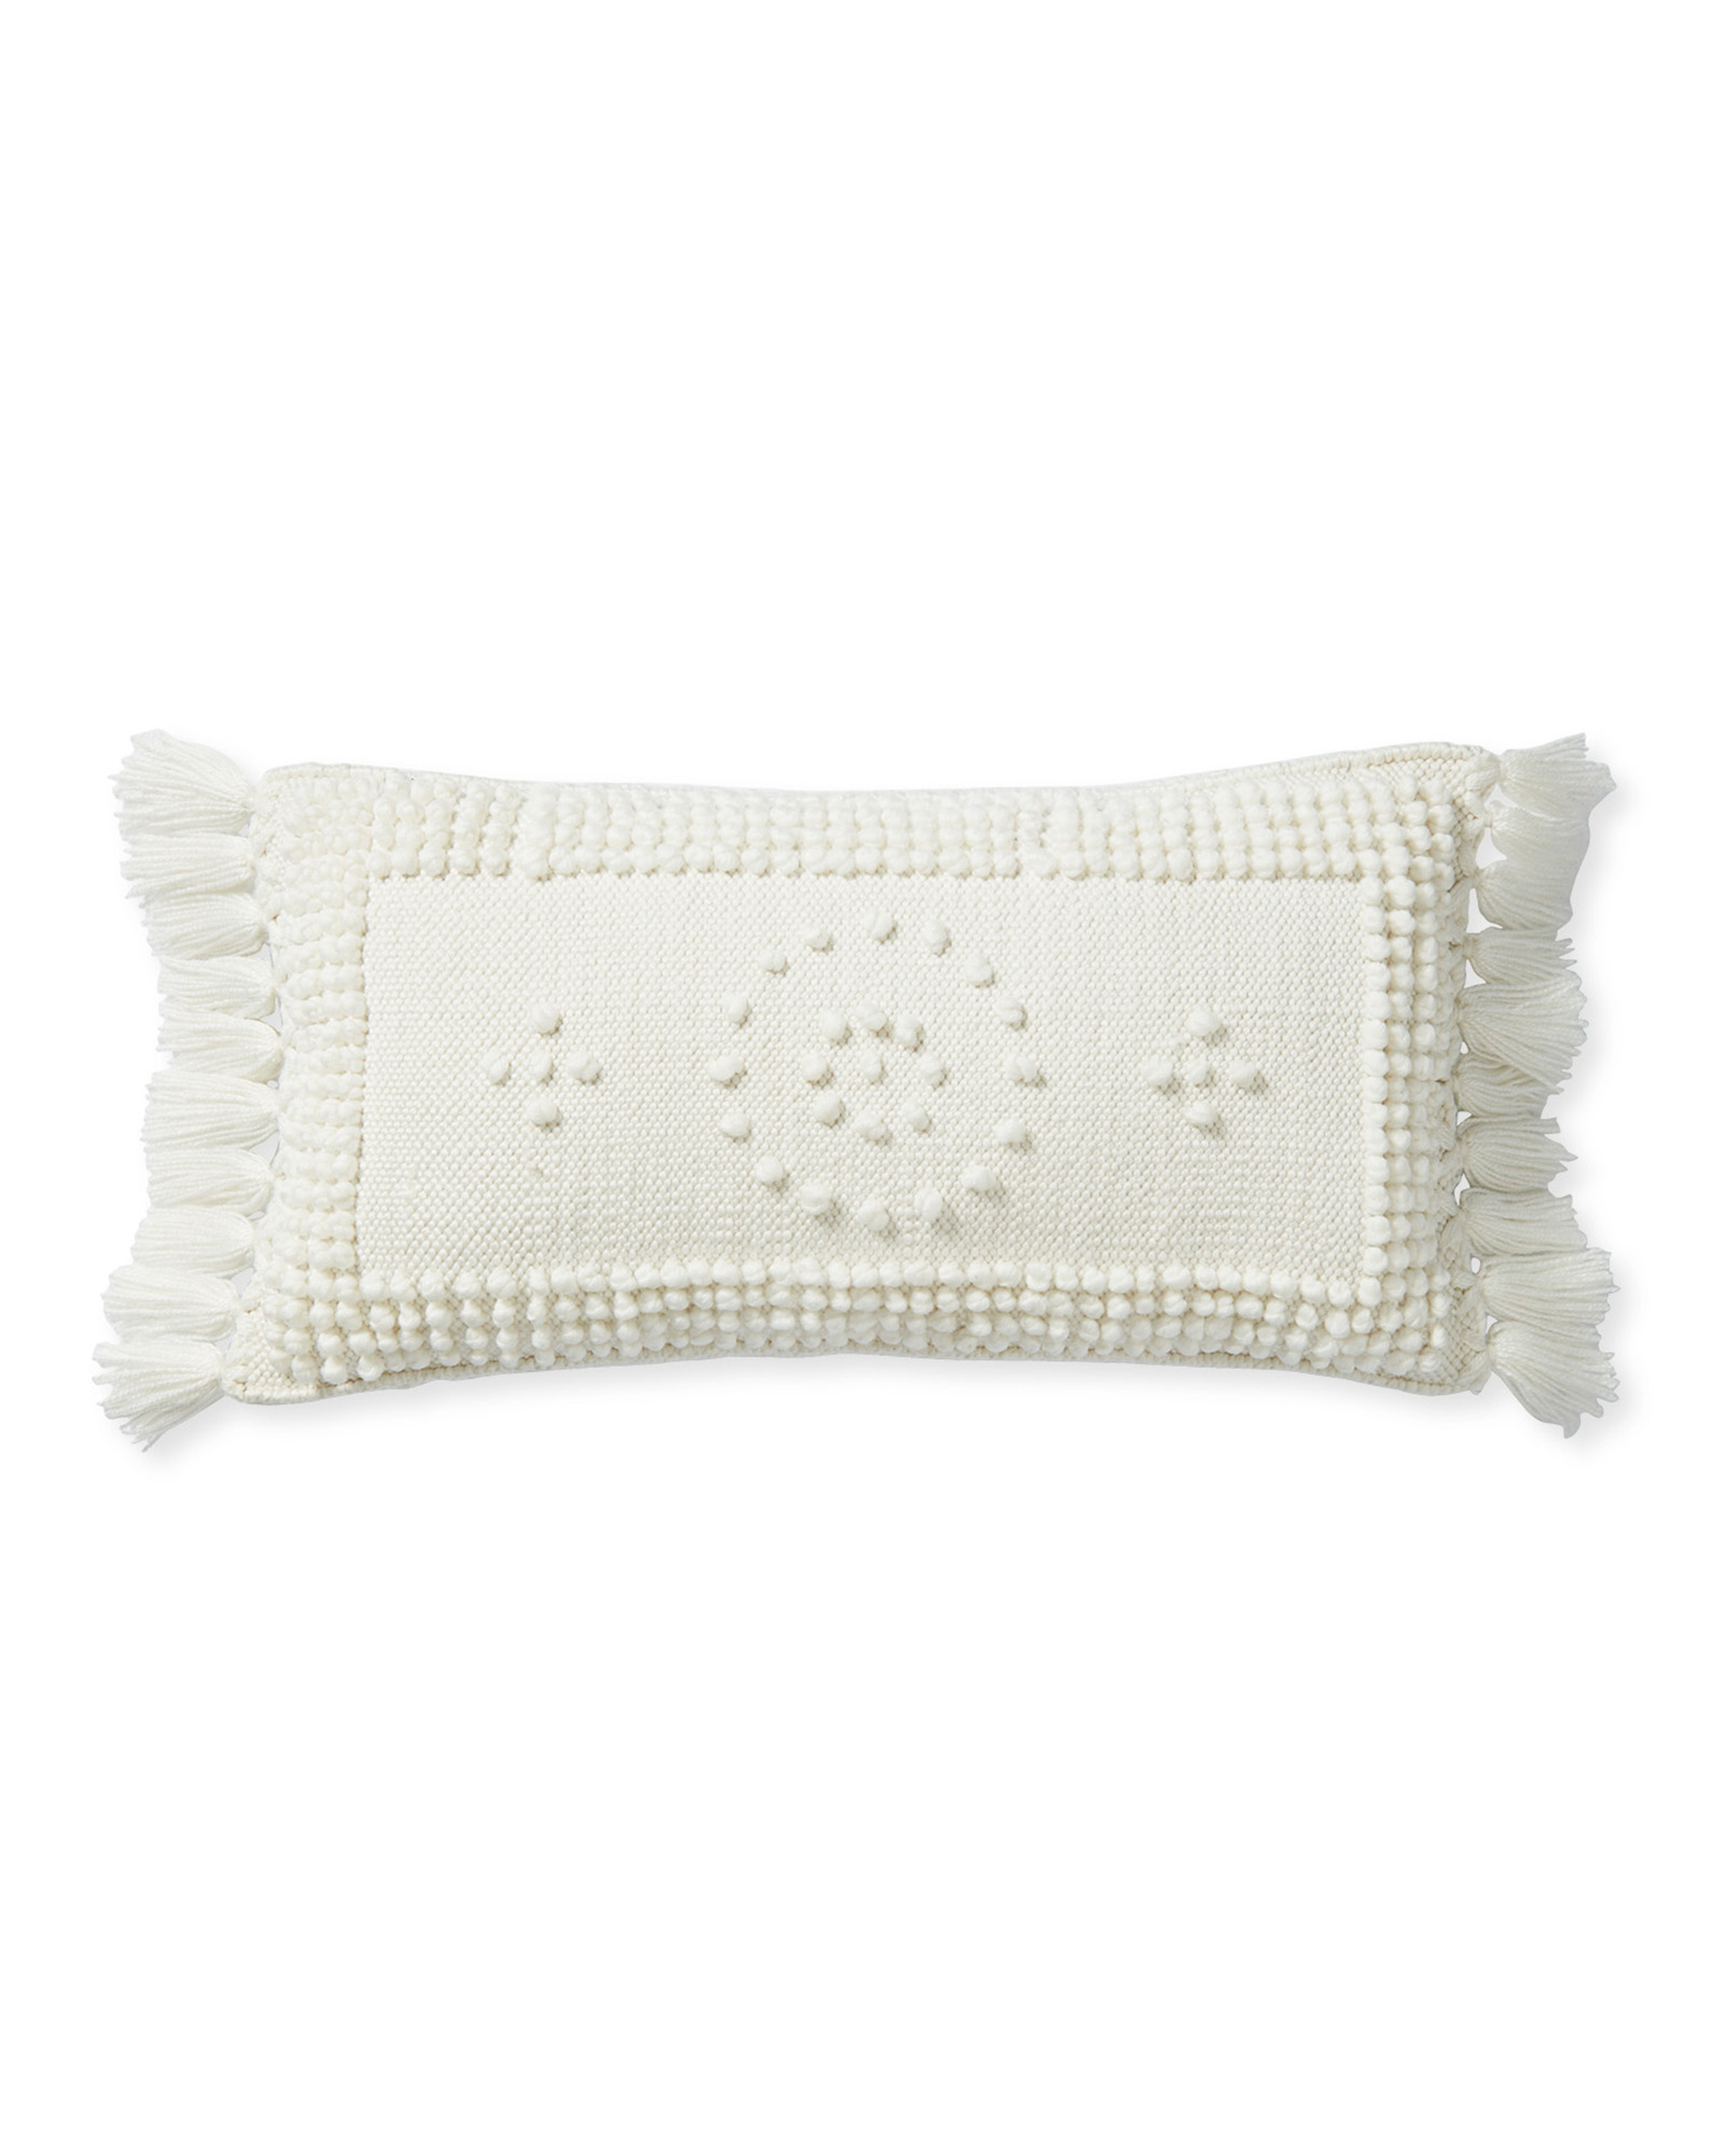 Montecito Outdoor 12" x 21" Pillow Cover - Ivory - Insert sold separately - Serena and Lily